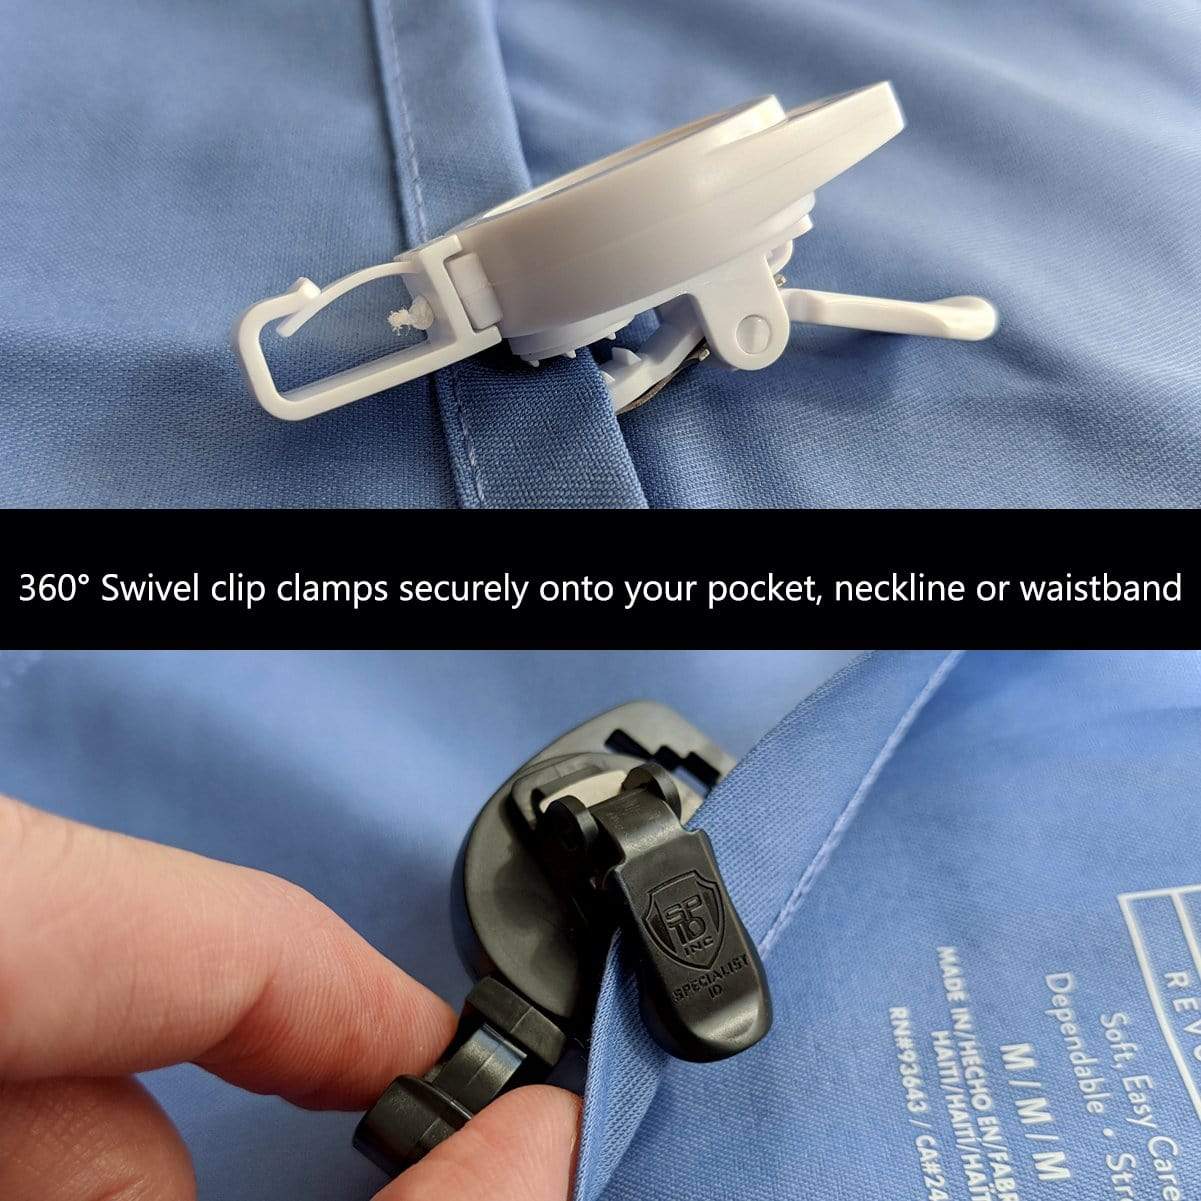 MRI Safe Badge Reel - Non-Ferrous Metal Retractable Badge Clips with No Twist ID Holder Clip for Imaging Room Techs & Nurses